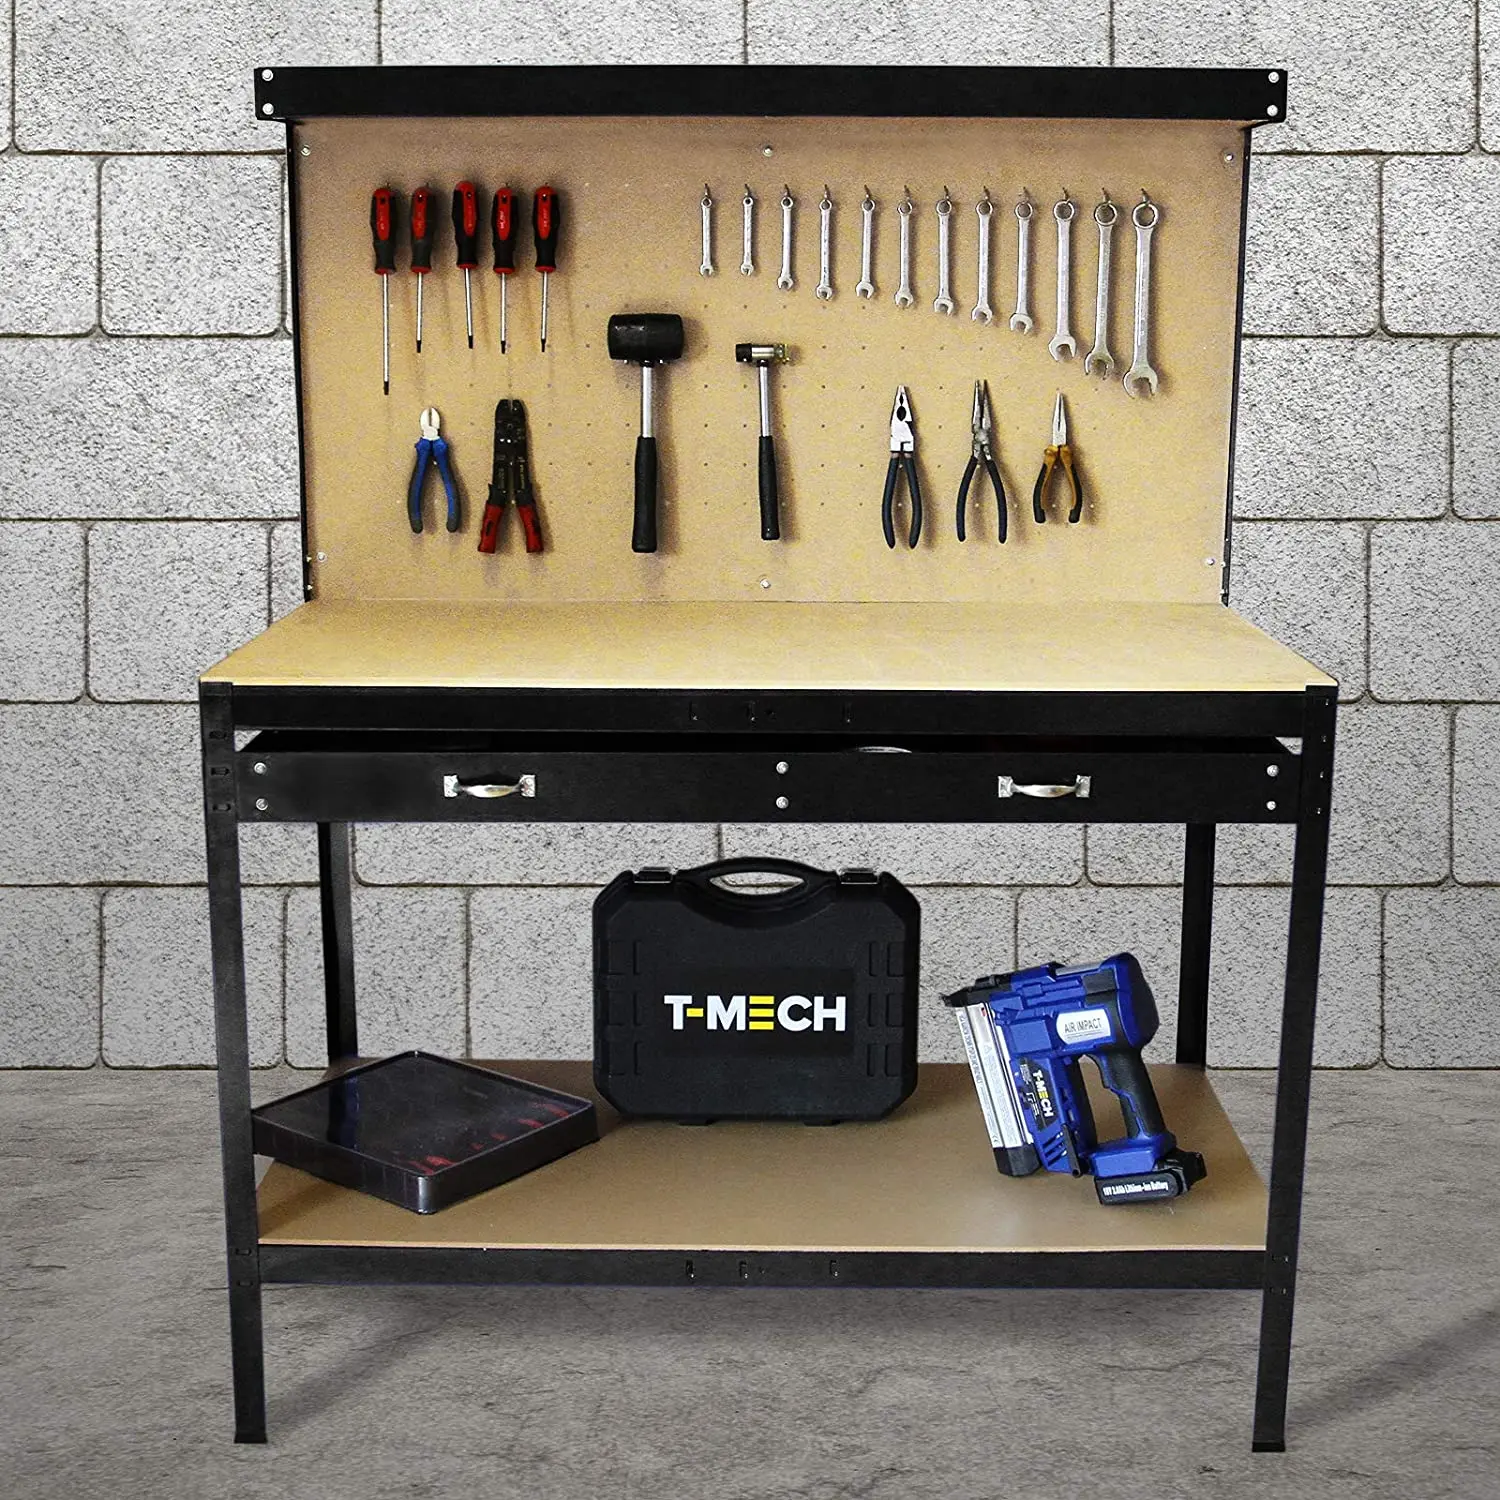 Steel Garage Work Bench Tool Box Workbench Storage With Drawers Pegboard and 12 Pegs Shelf Boltless DIY Workshop Station Heavy Duty 440kg Capacity Blue 